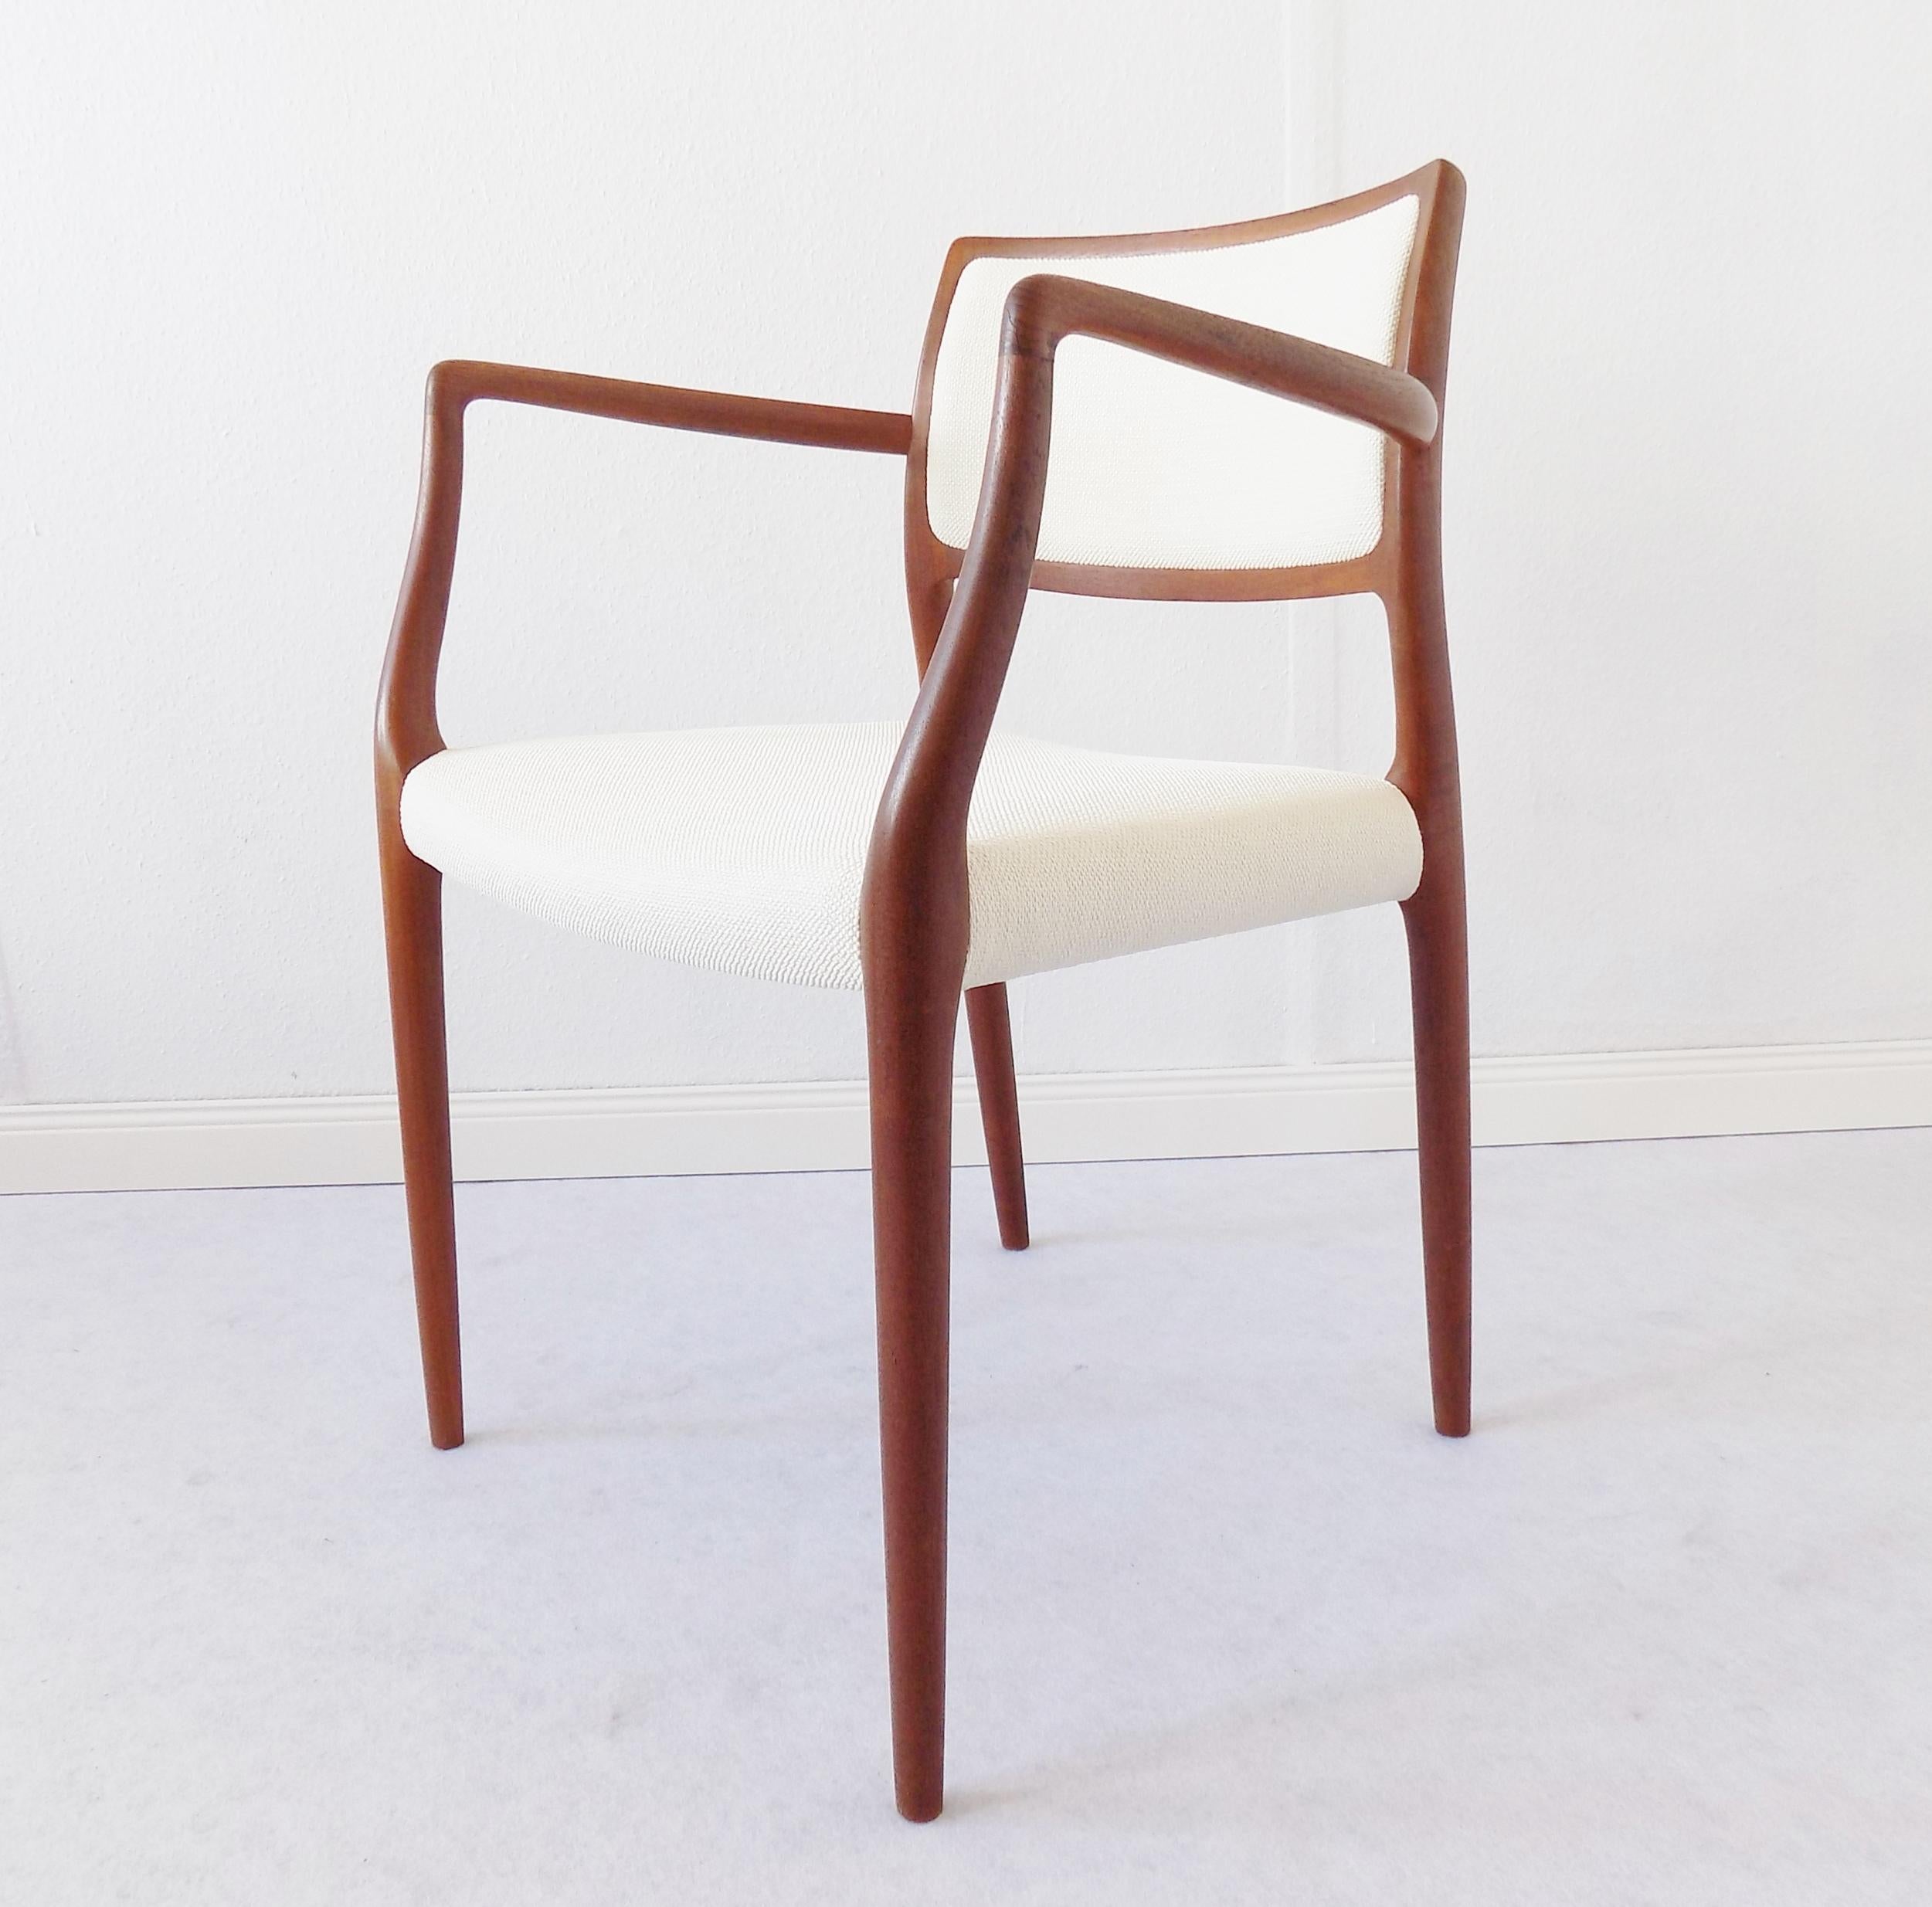 Niels Möller Model 65 Lounge Chair, Danish Teak, Mid-Century modern, upholstered

The chair is made very filigran in teak. Last week it was totally new upholstered and is in a new condition. Teak in very warm color and good condition. A nice